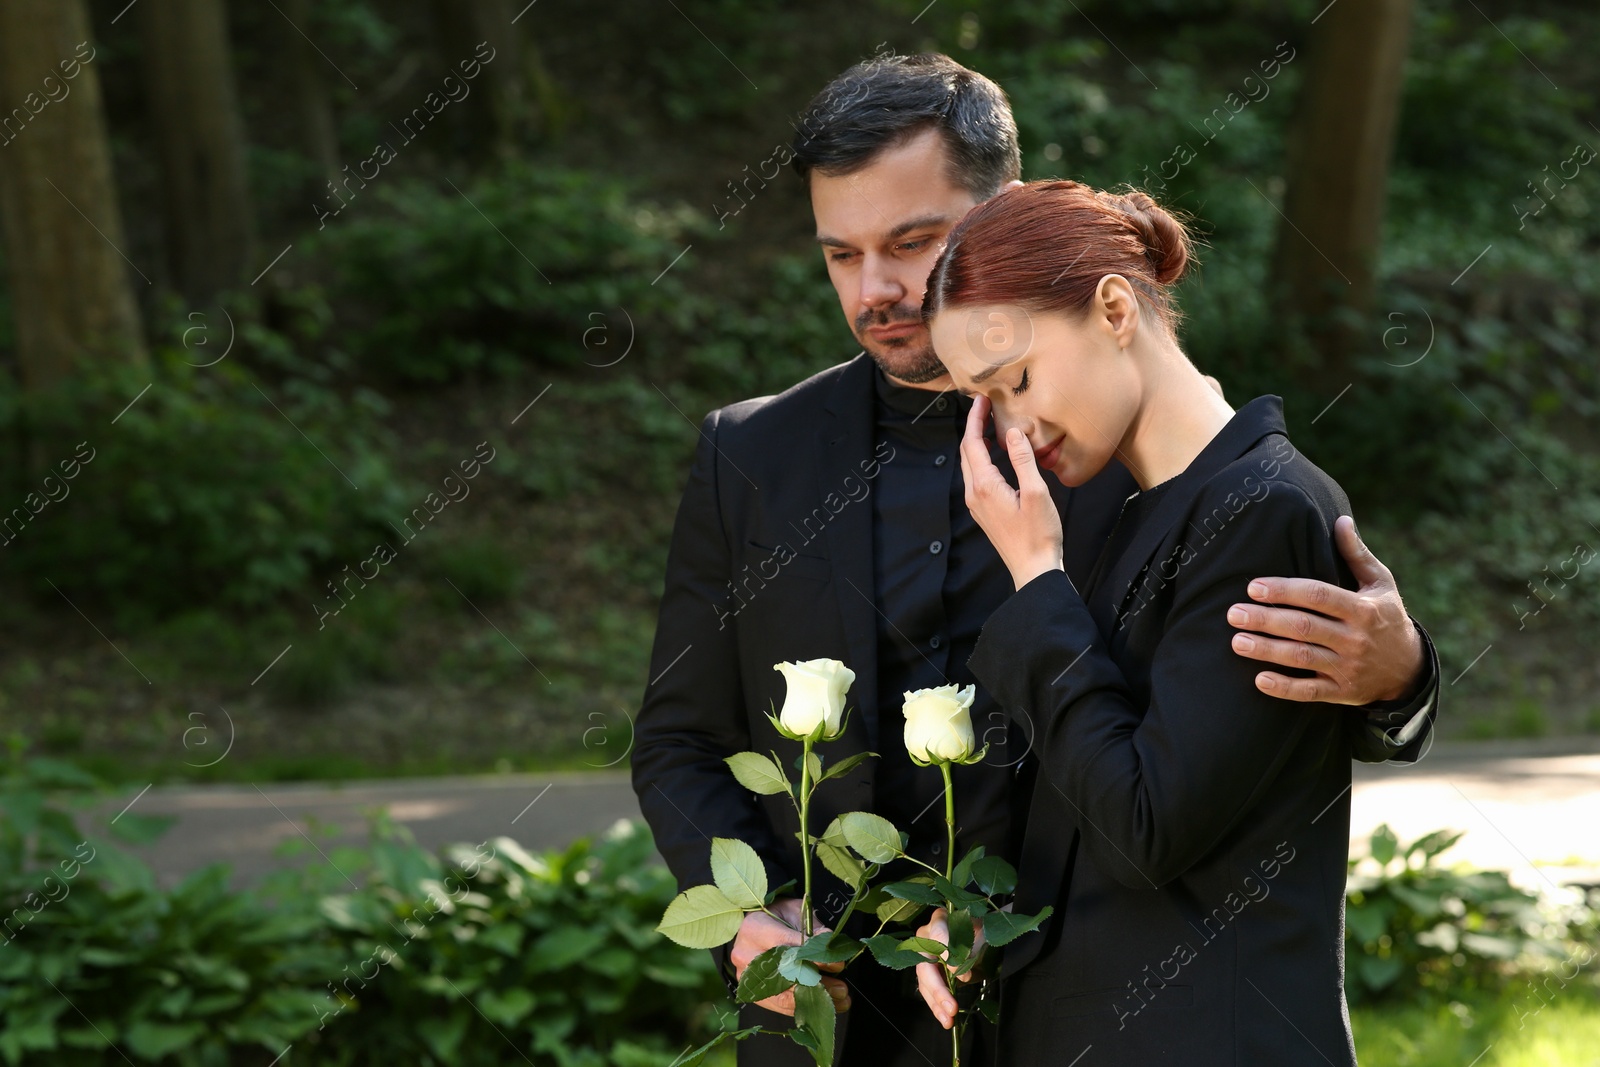 Photo of Funeral ceremony. Man comforting woman outdoors, space for text